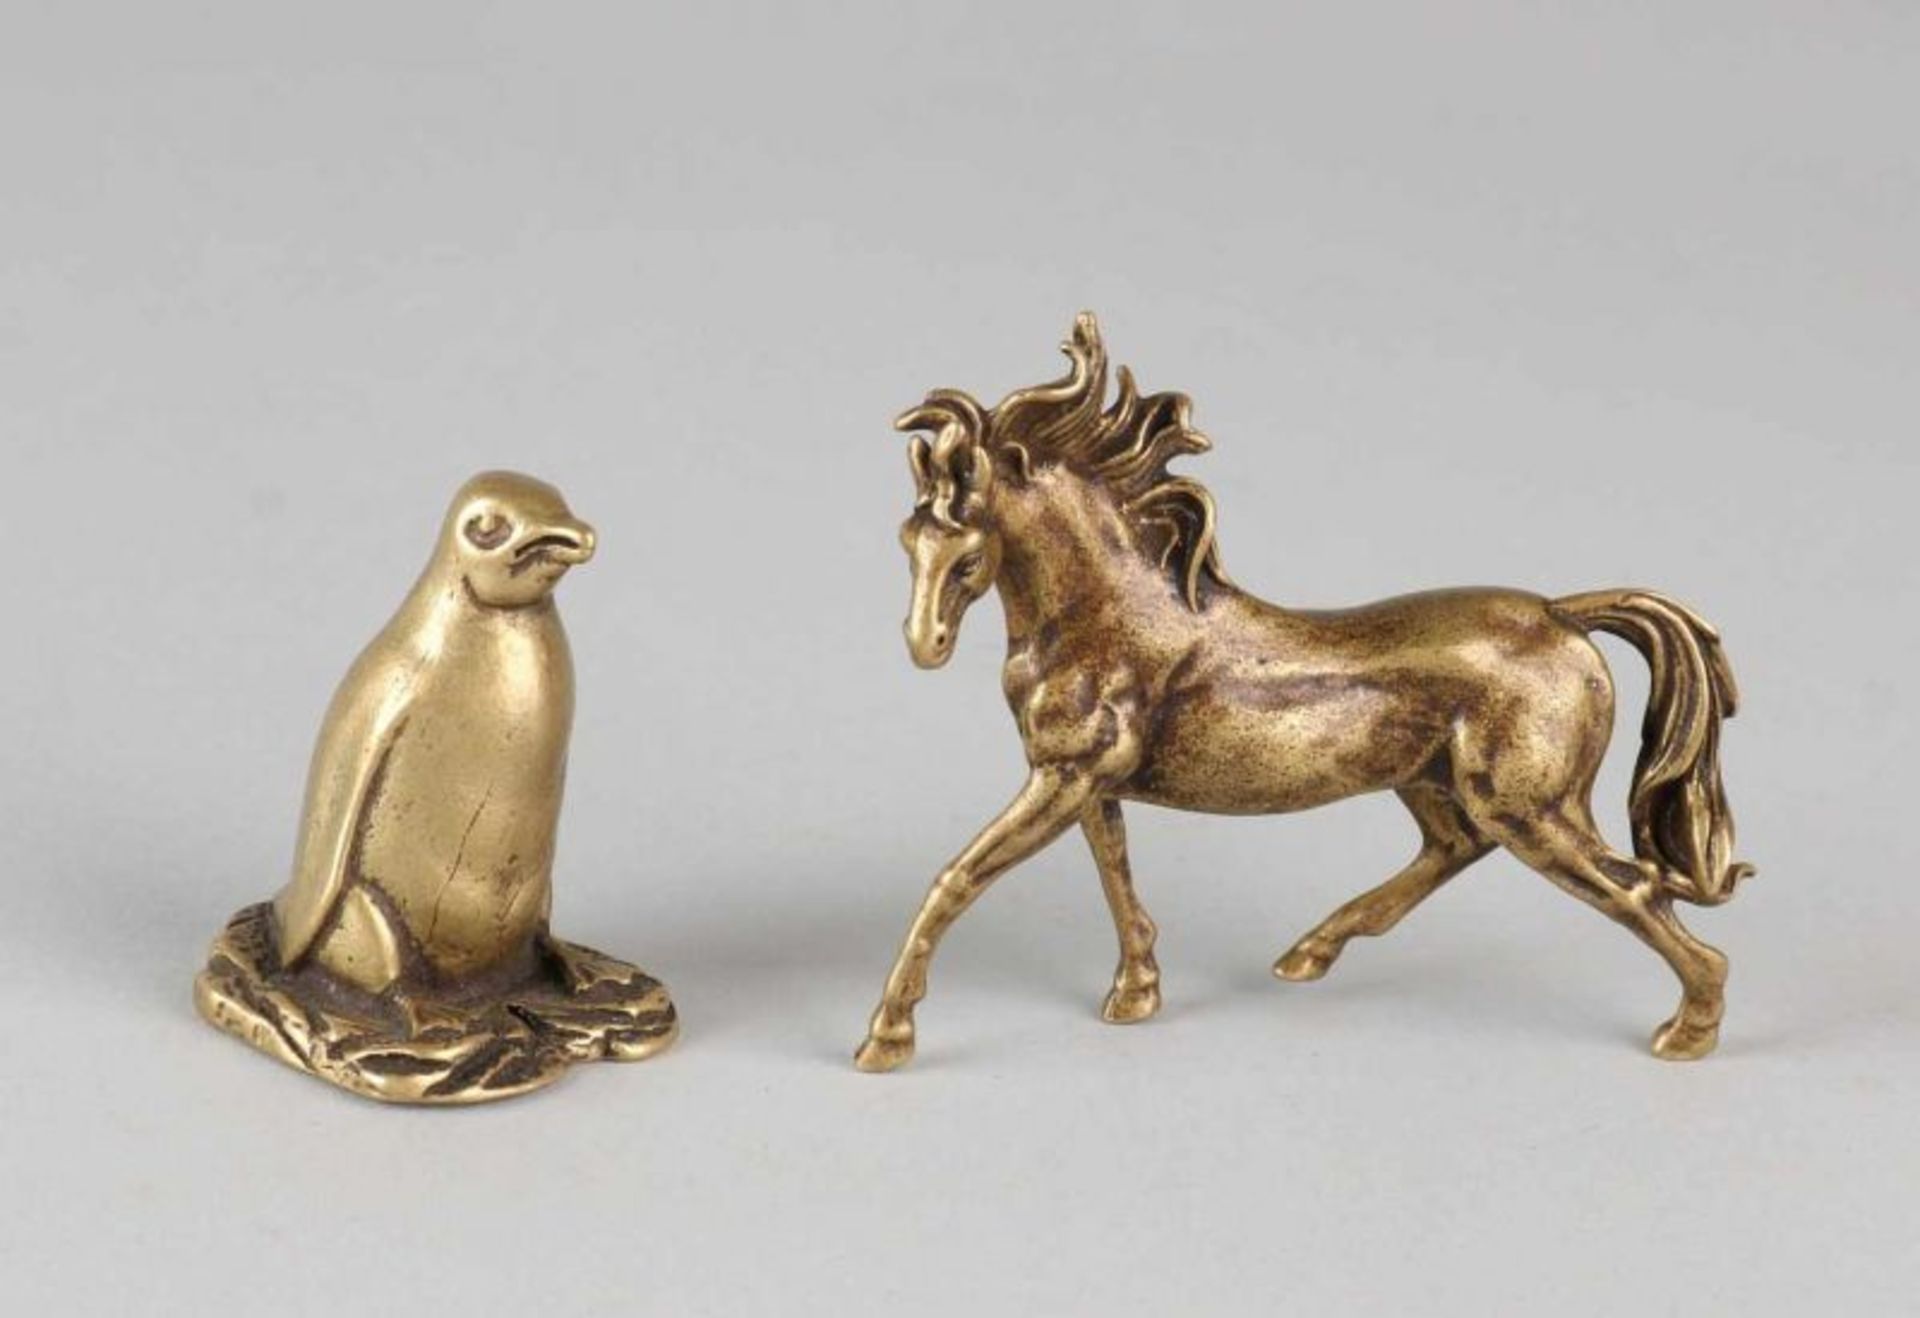 Two small old / antique bronzes. 20th century. Penguin + horse. Size: 4-7 cm. In good condition.